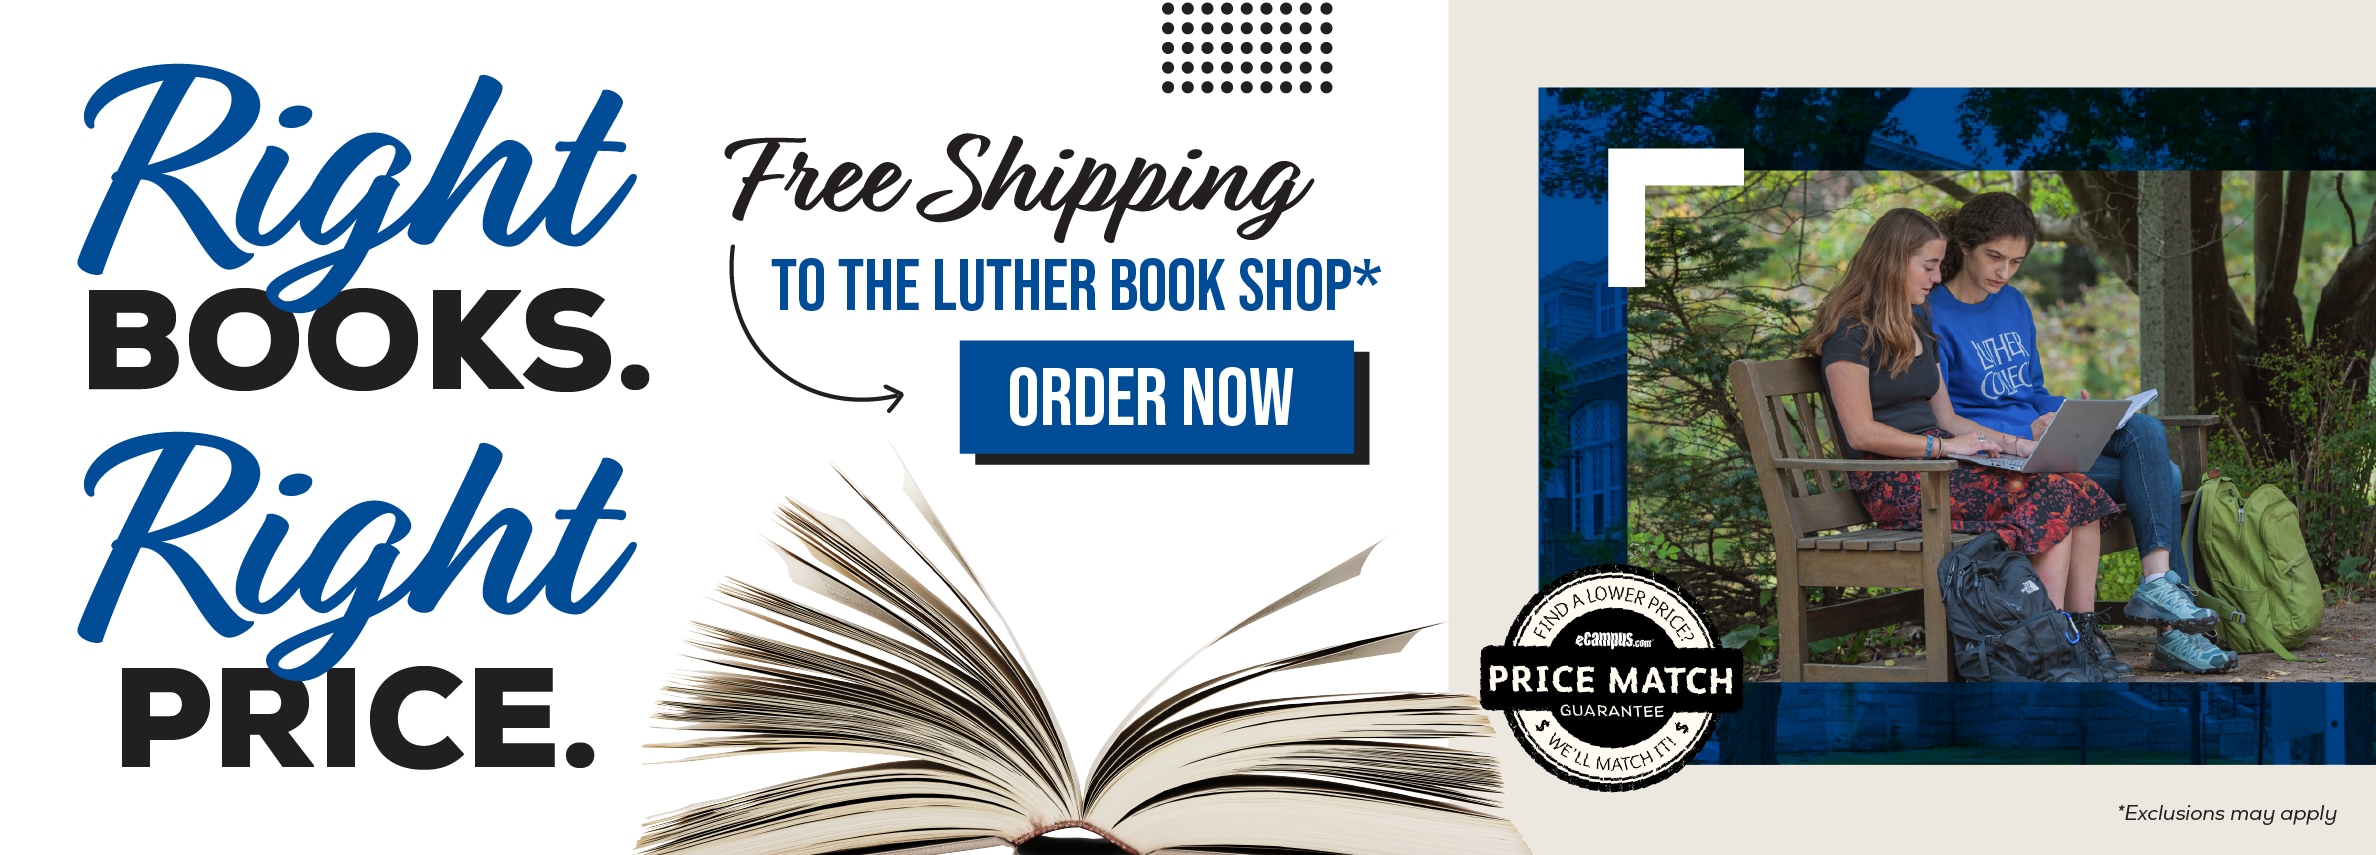 Right books. Right price. Free shipping to the Luther Book Shop.* Order now. Price Match Guarantee. *Exclusions may apply.